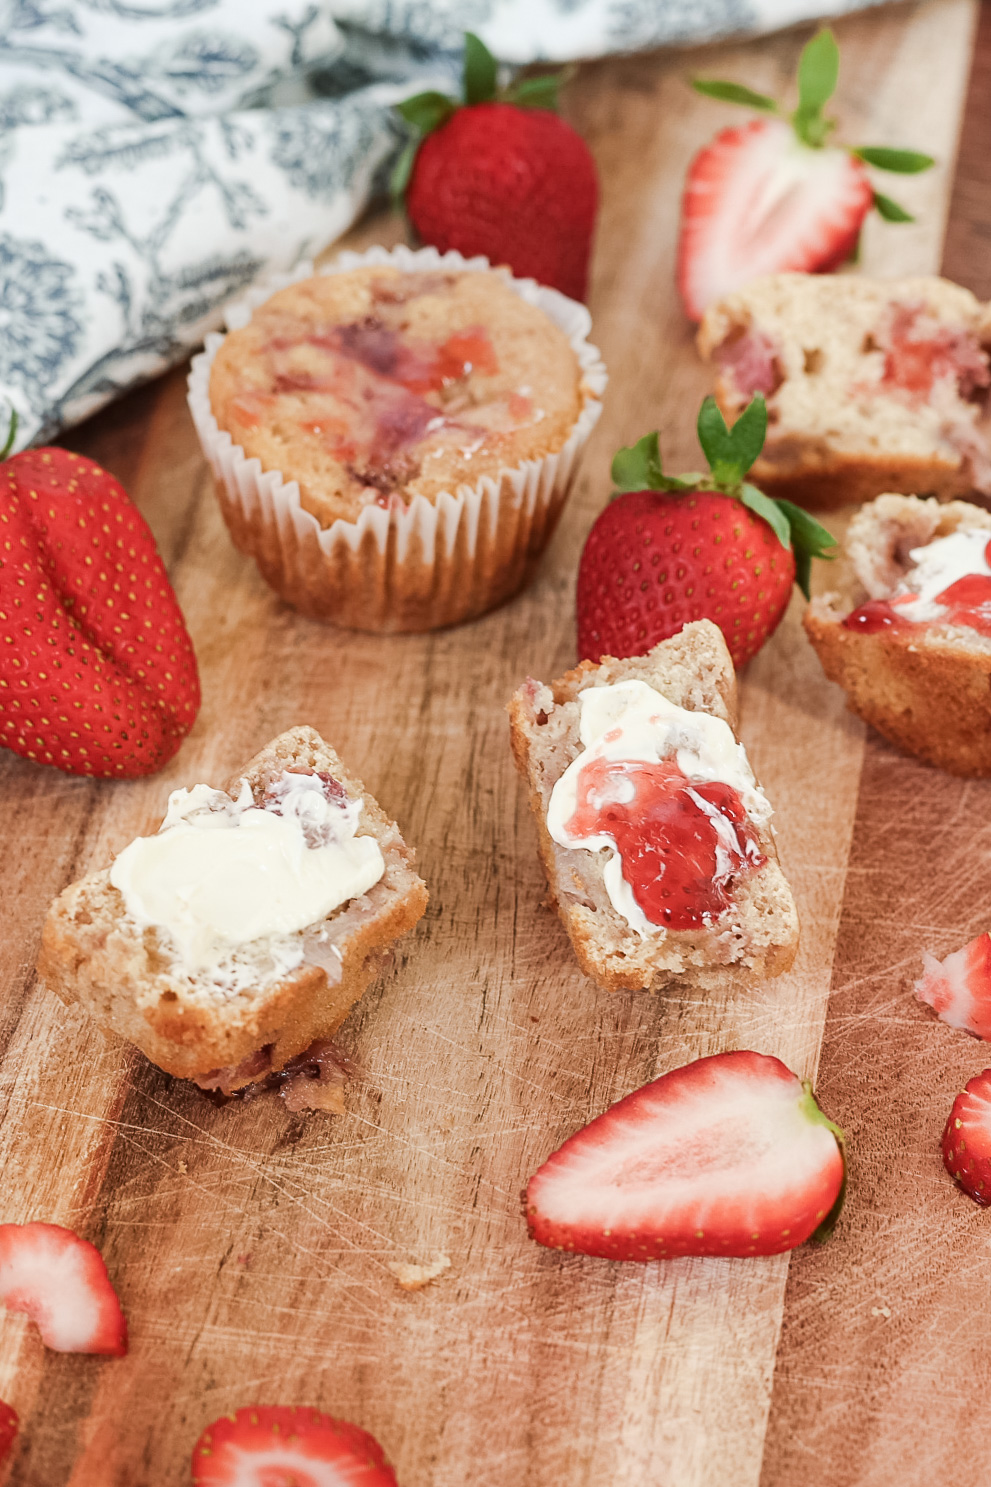 Strawberries and strawberry muffins on a wooden cutting board. 